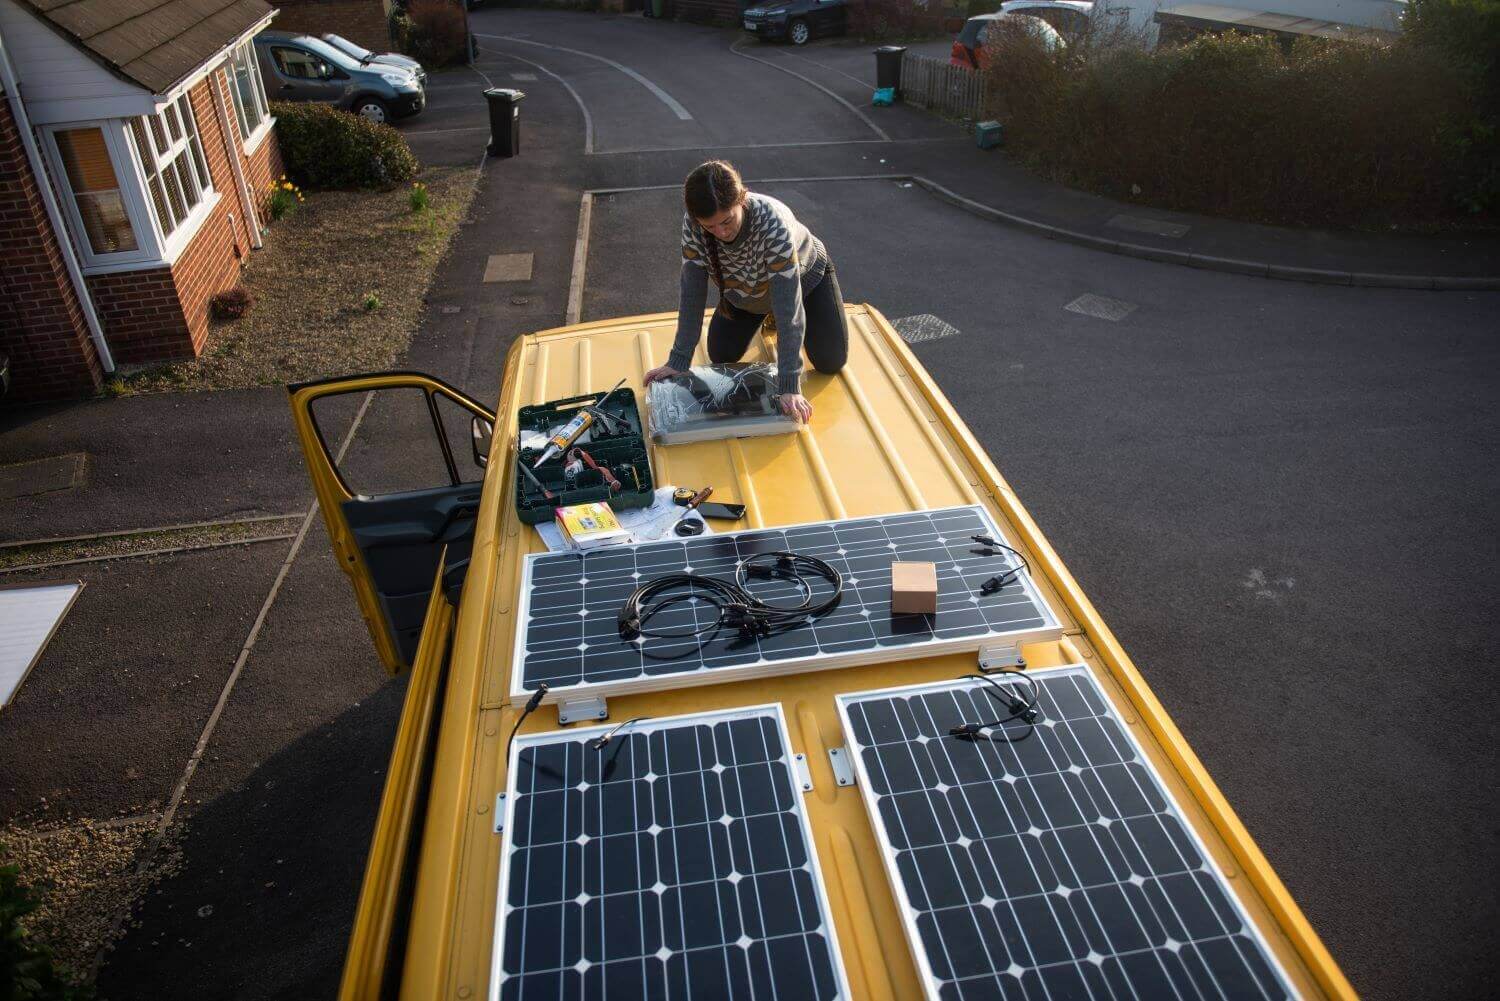 choose right place on van for solar panels